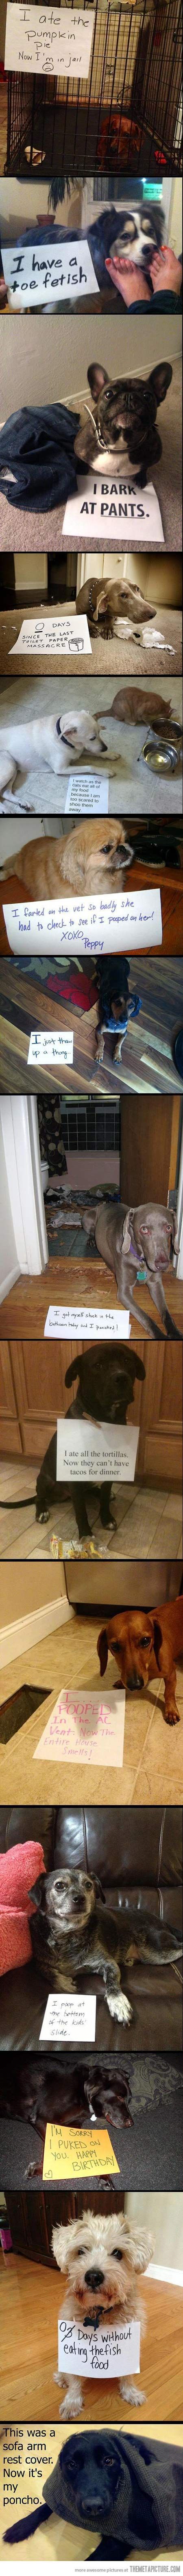 Best of Dog Shaming…it's so funny how sad the dogs look in the picture